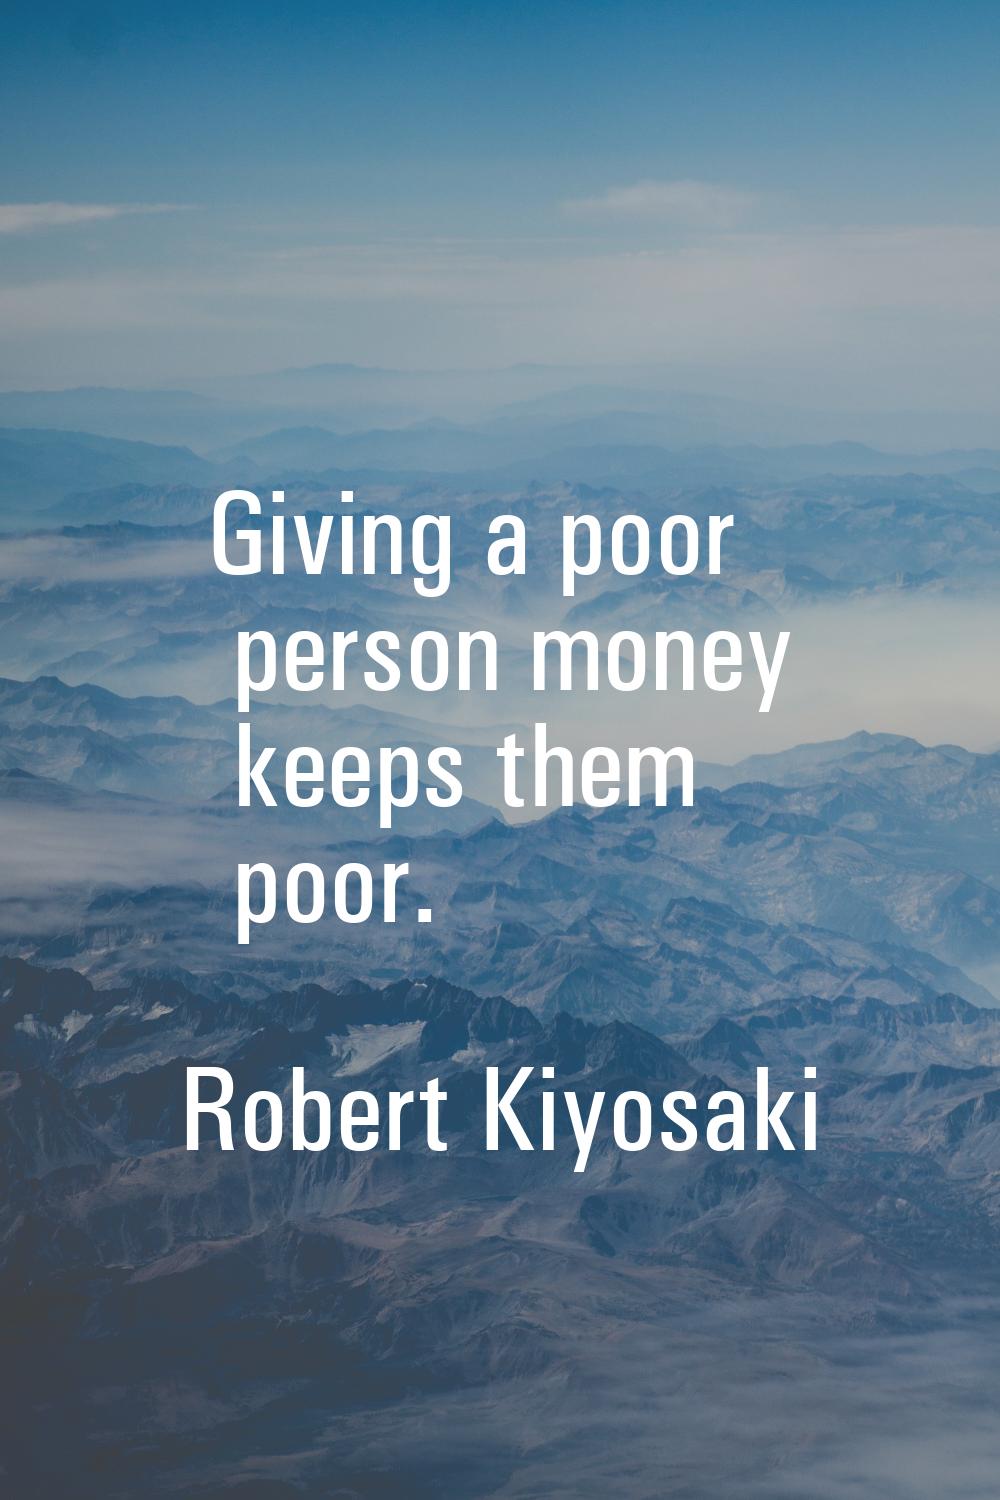 Giving a poor person money keeps them poor.